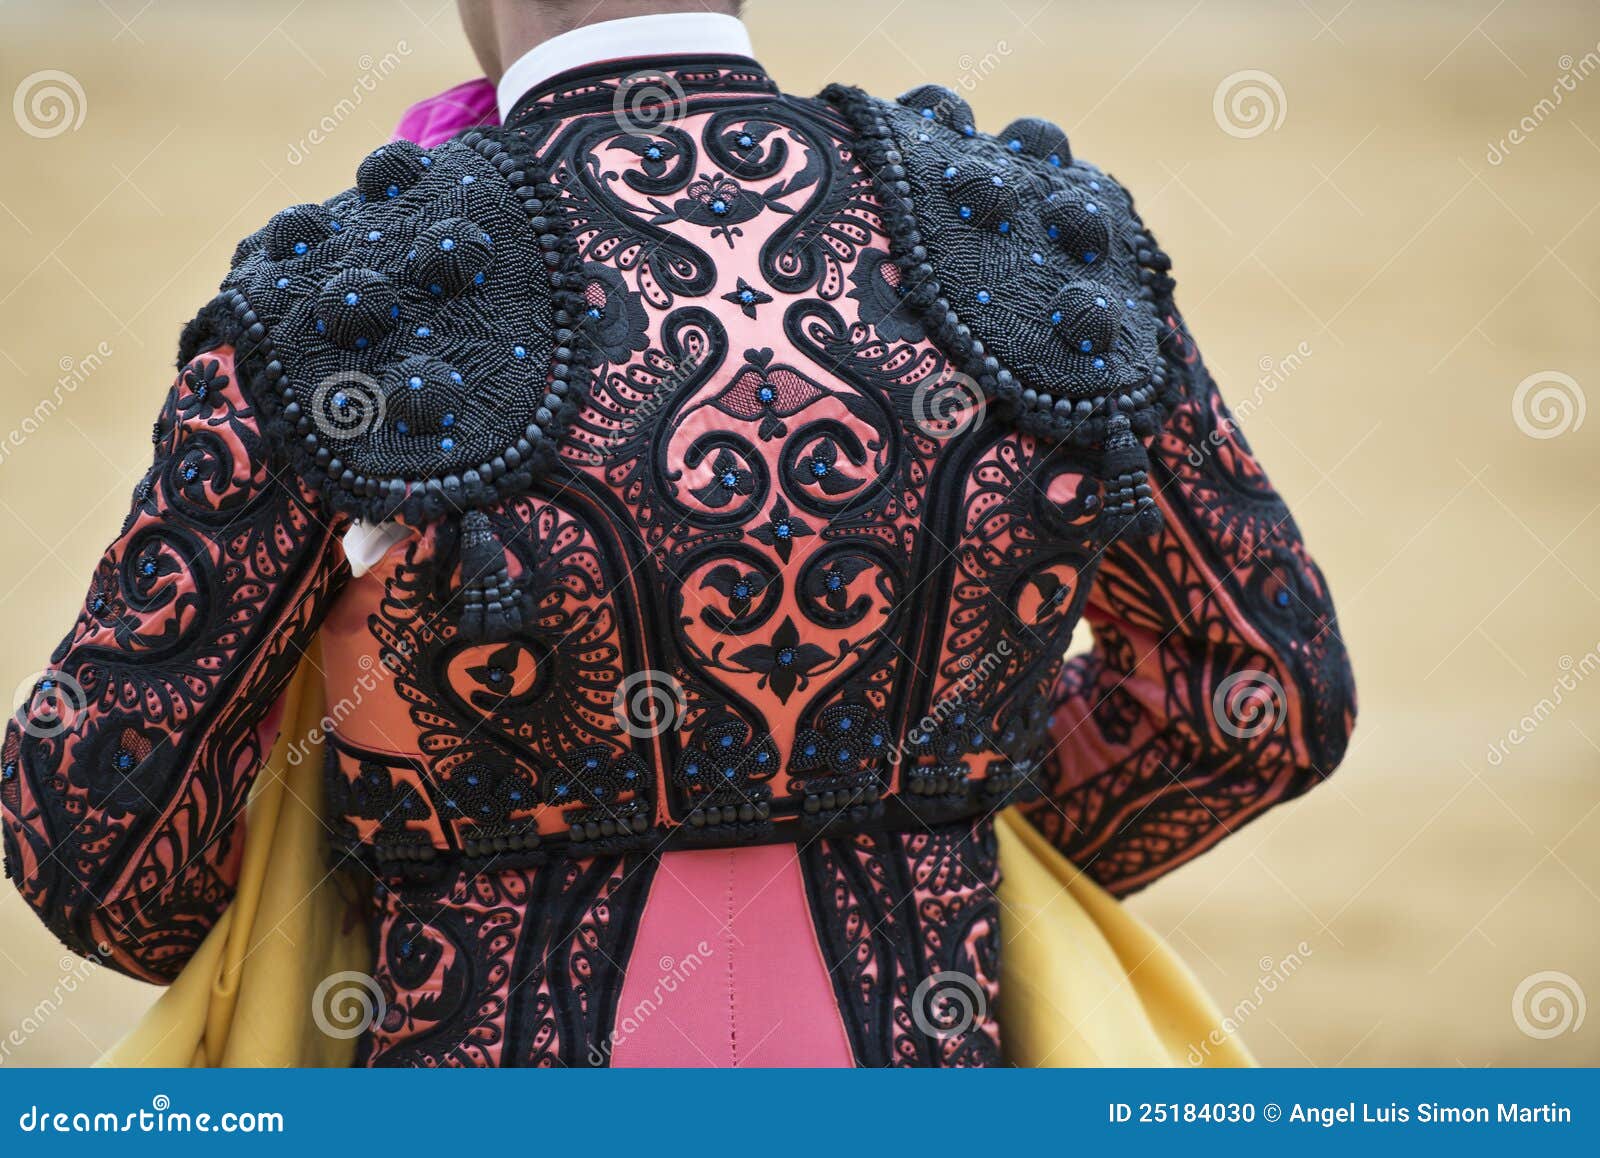 detail of the jacket of the bullfighter.